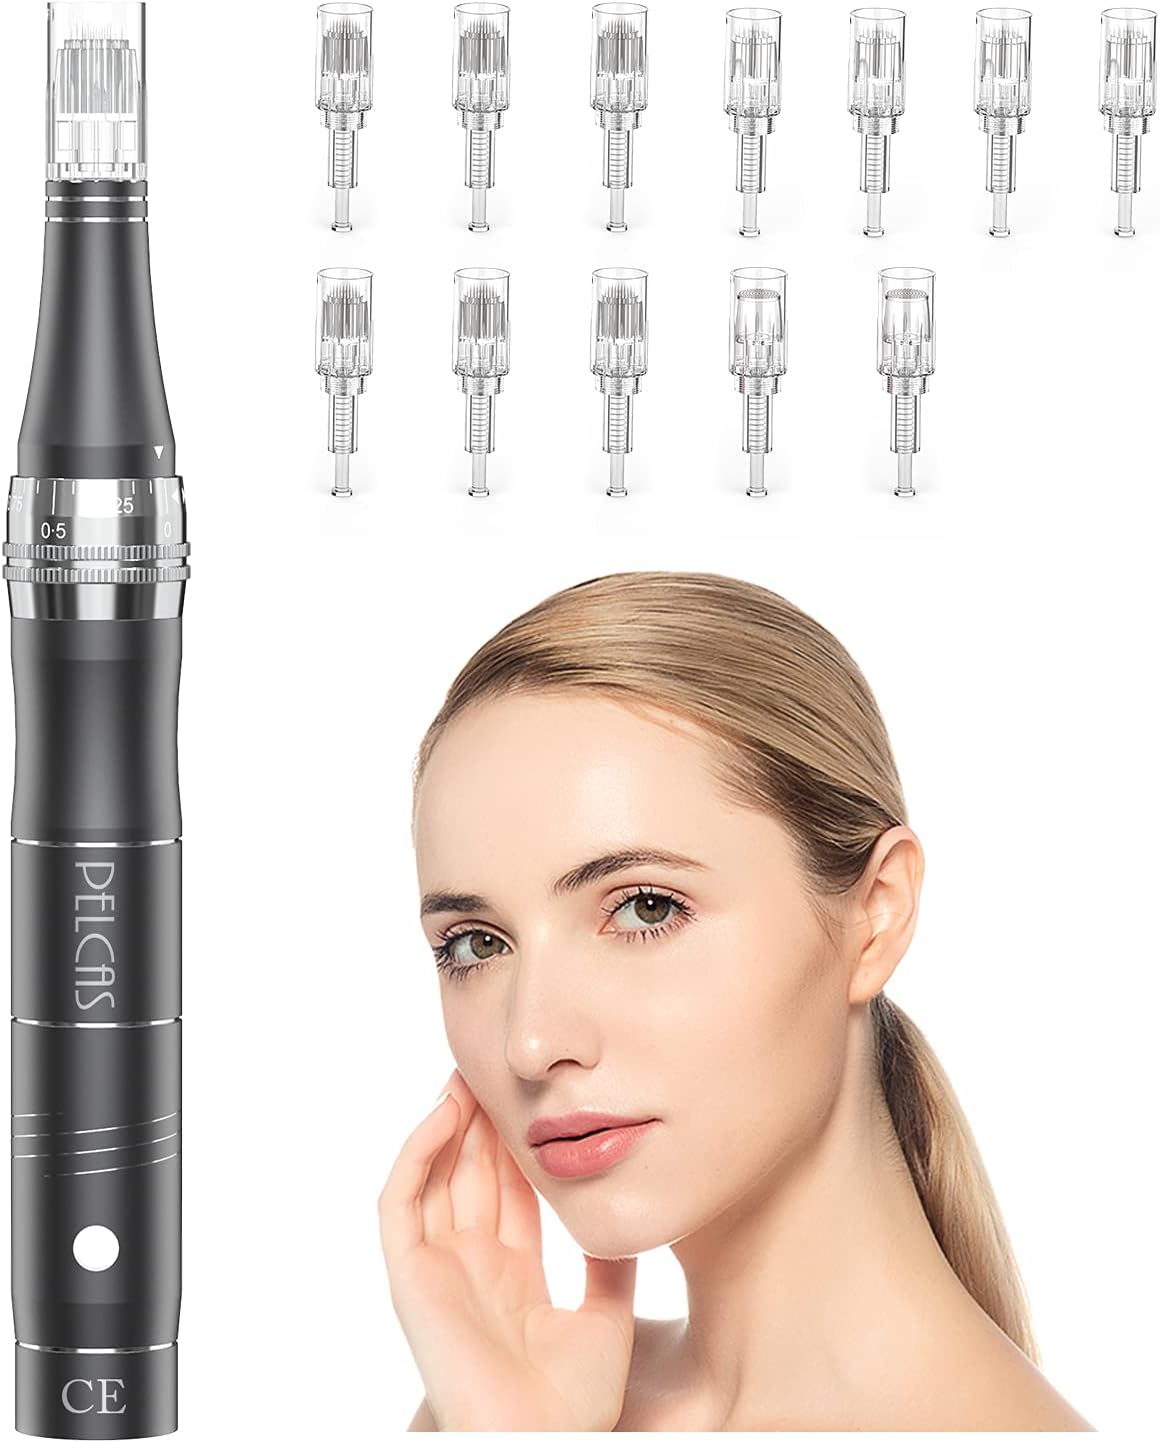 X-Pen - for micro-needle and fractional mesotherapy - DIVES MED